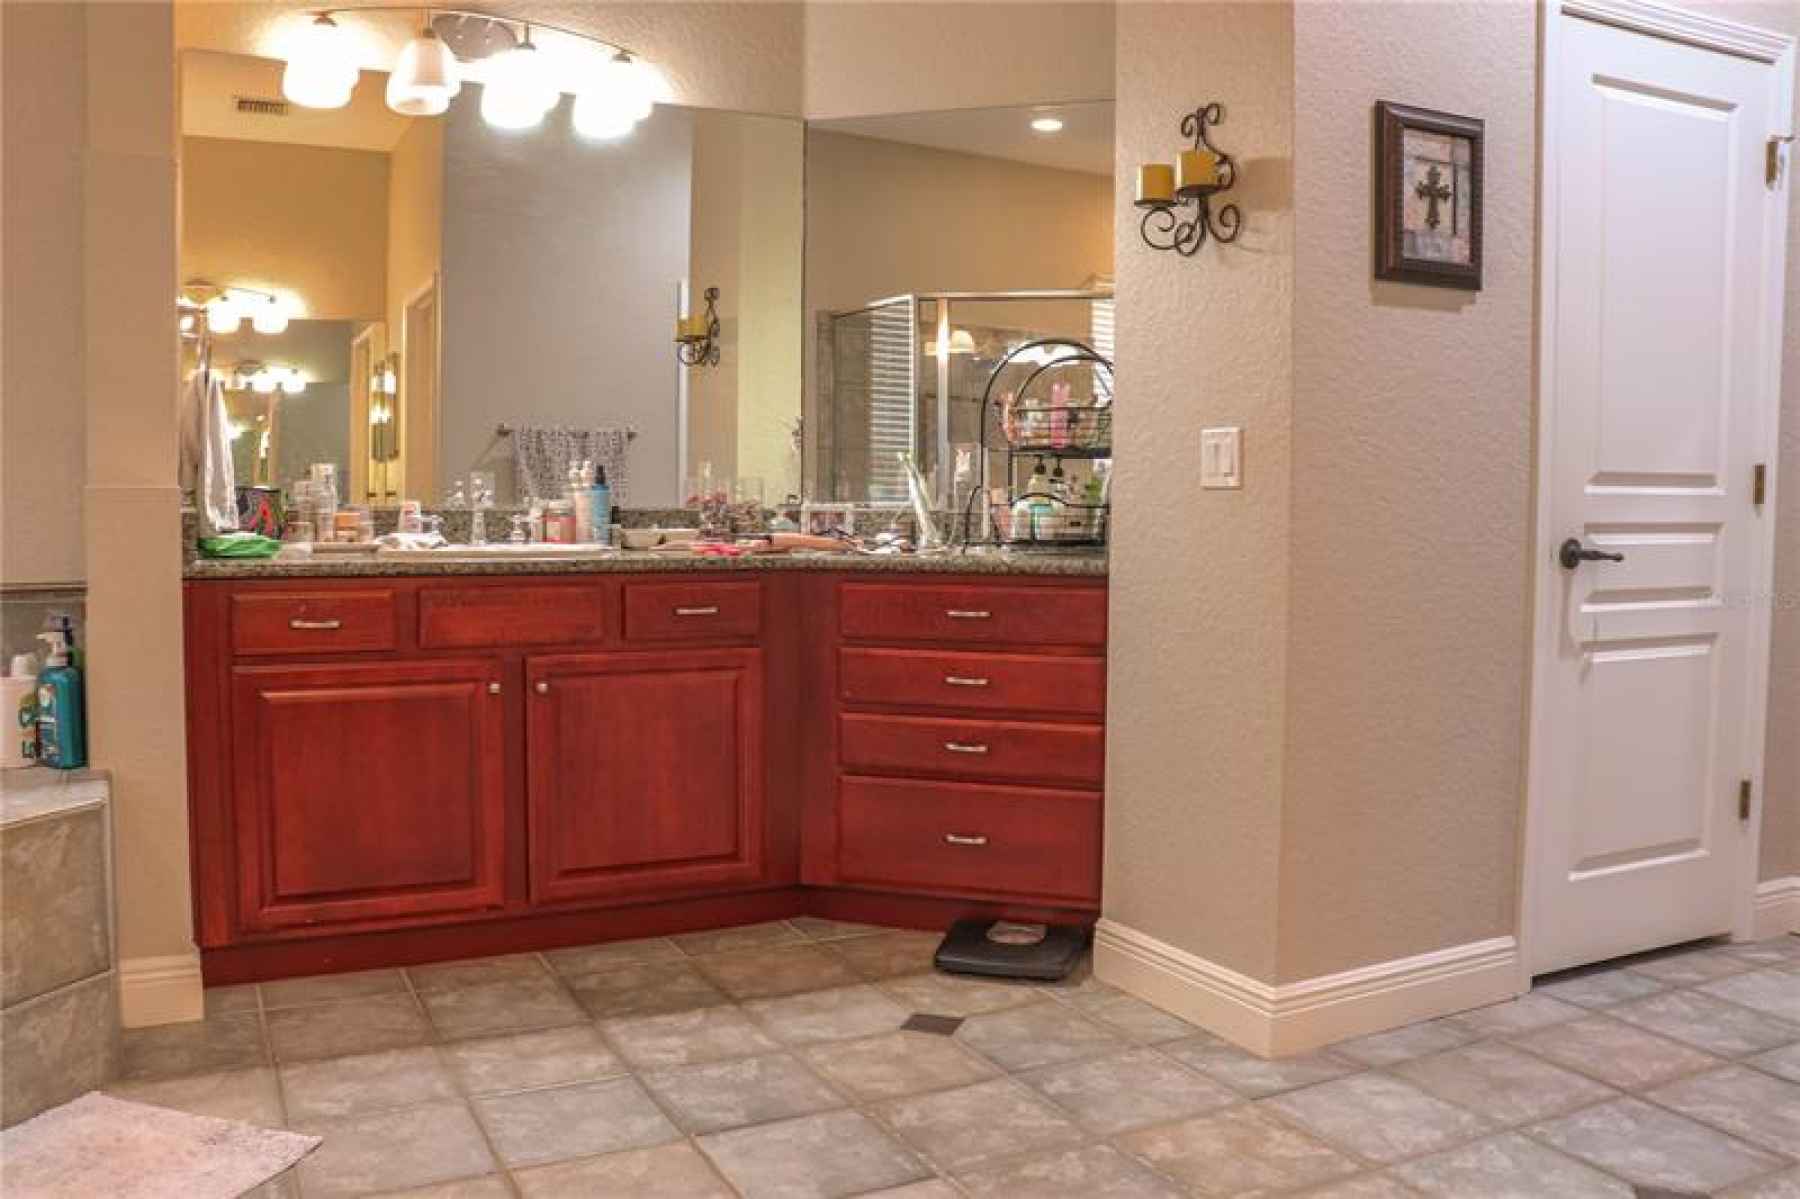 MASTER BATHROOM WITH SEPARATE SINKS/COUNTER